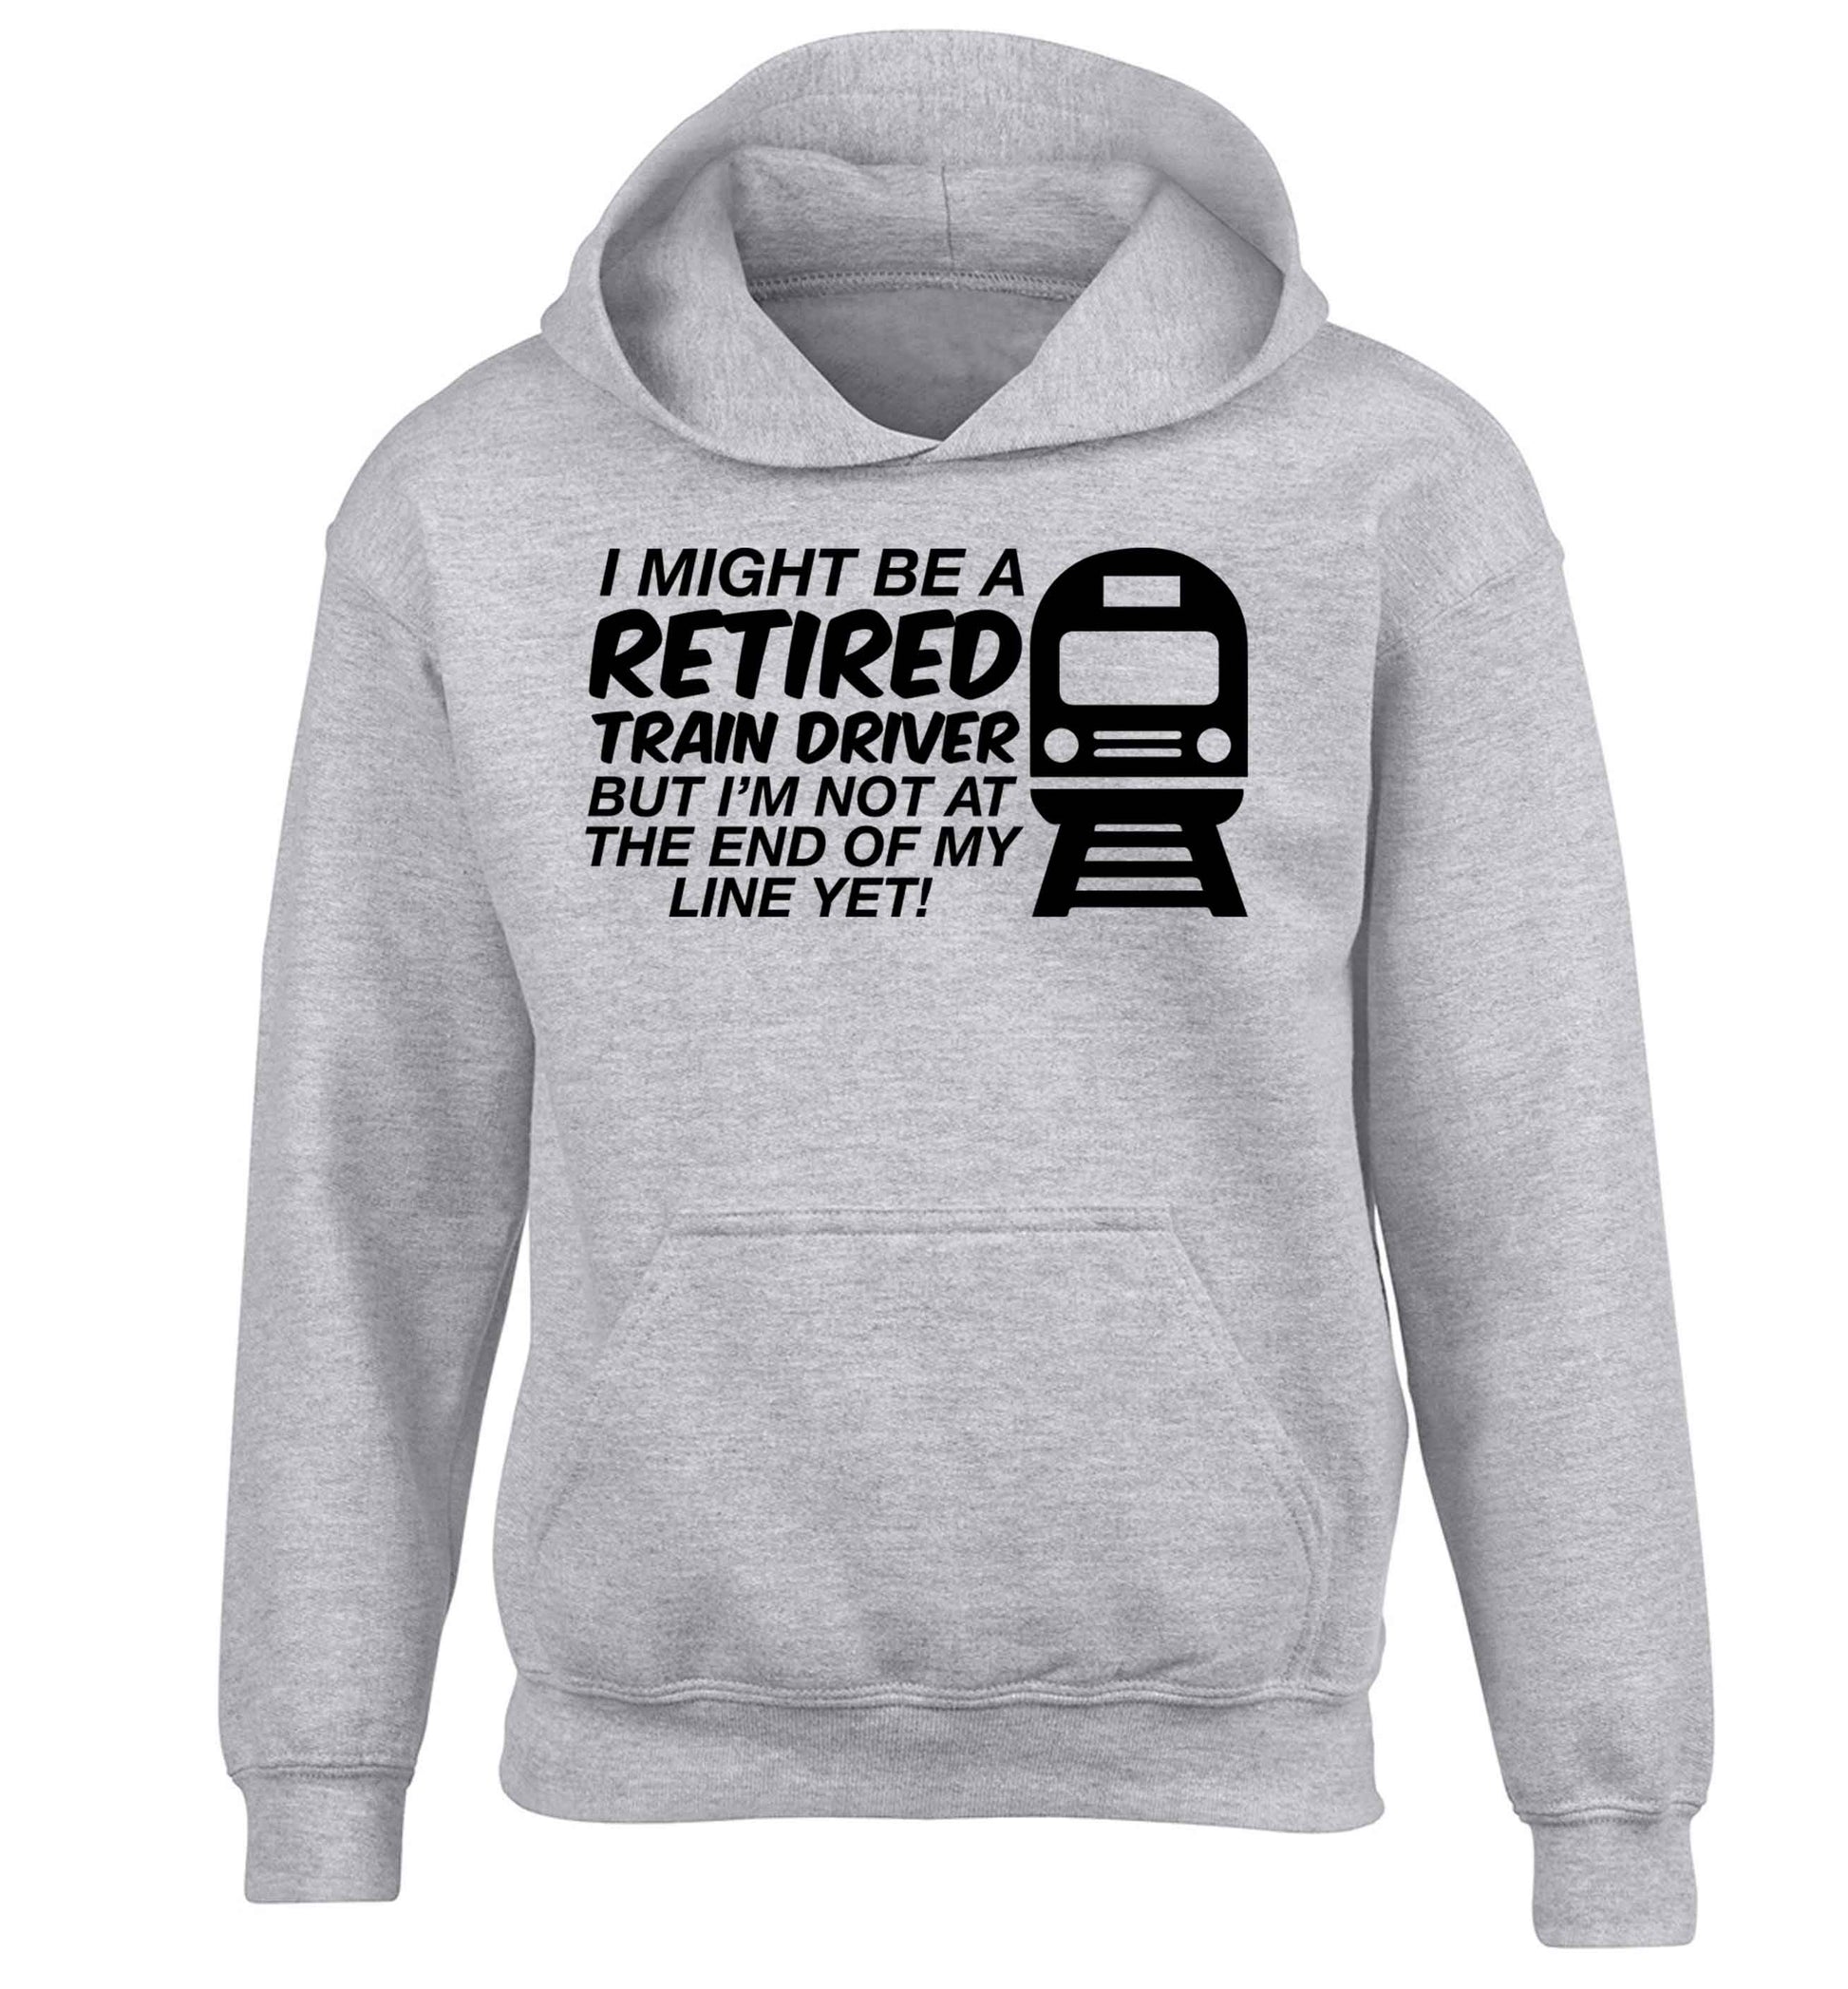 Retired train driver but I'm not at the end of my line yet children's grey hoodie 12-13 Years